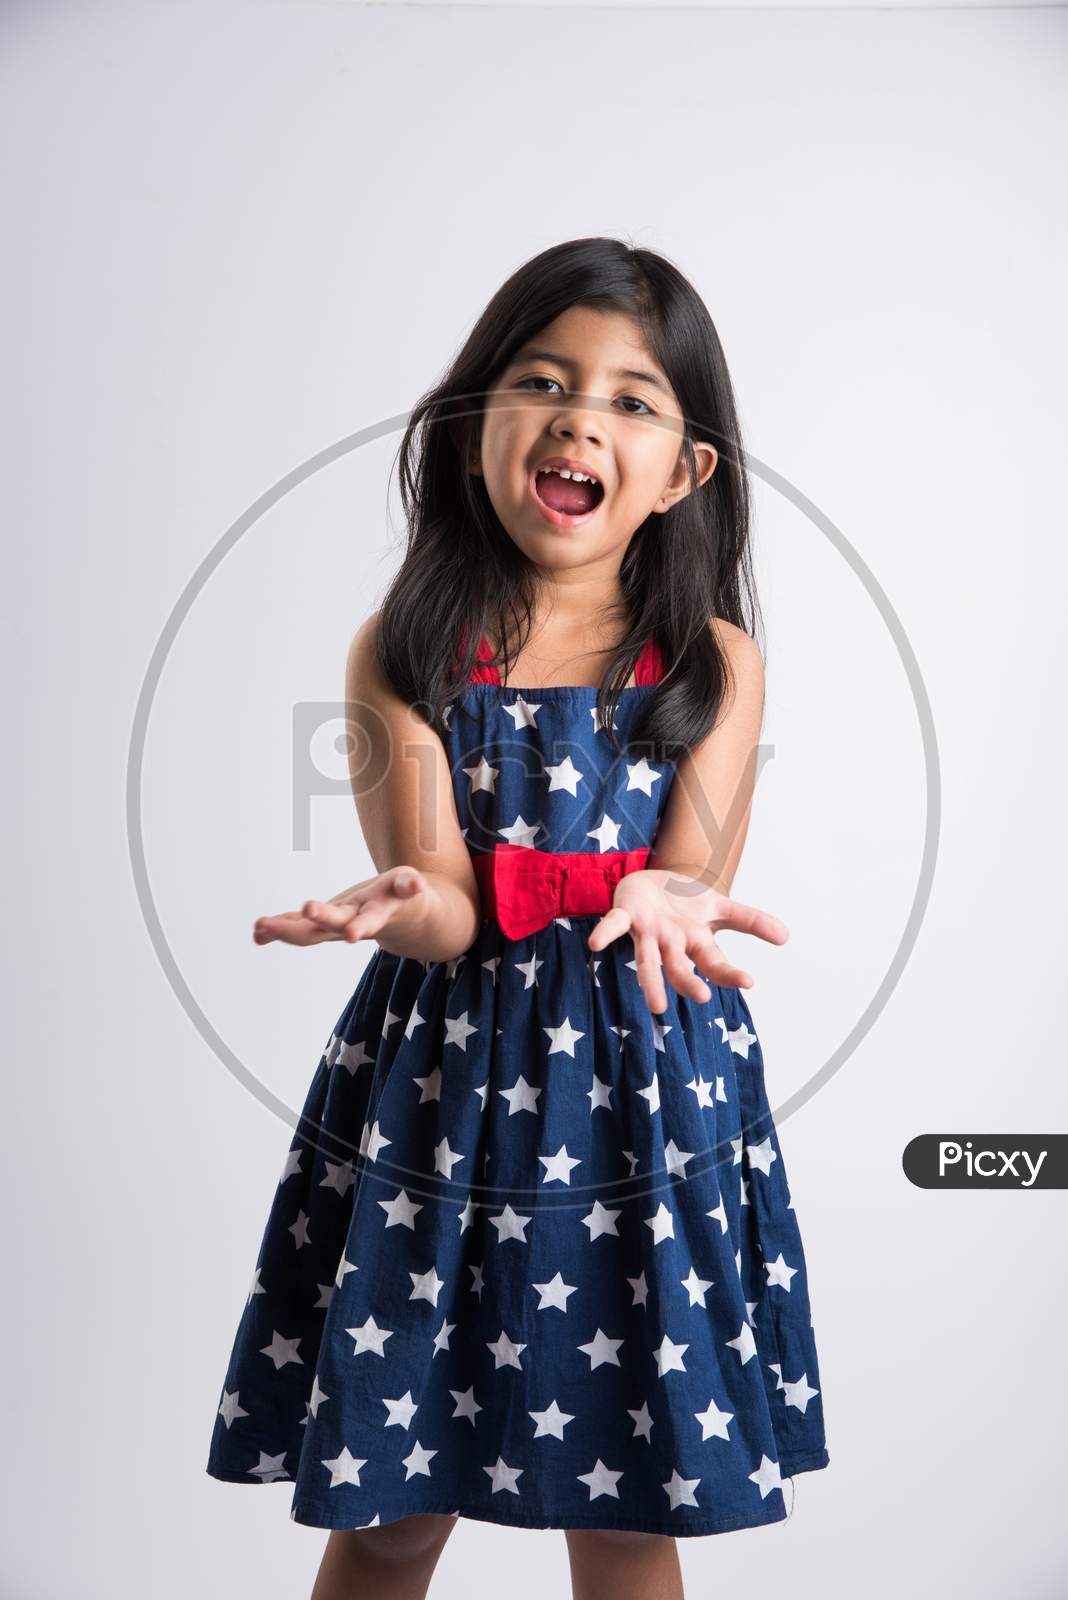 Indian cute girl with colourful palm over white background